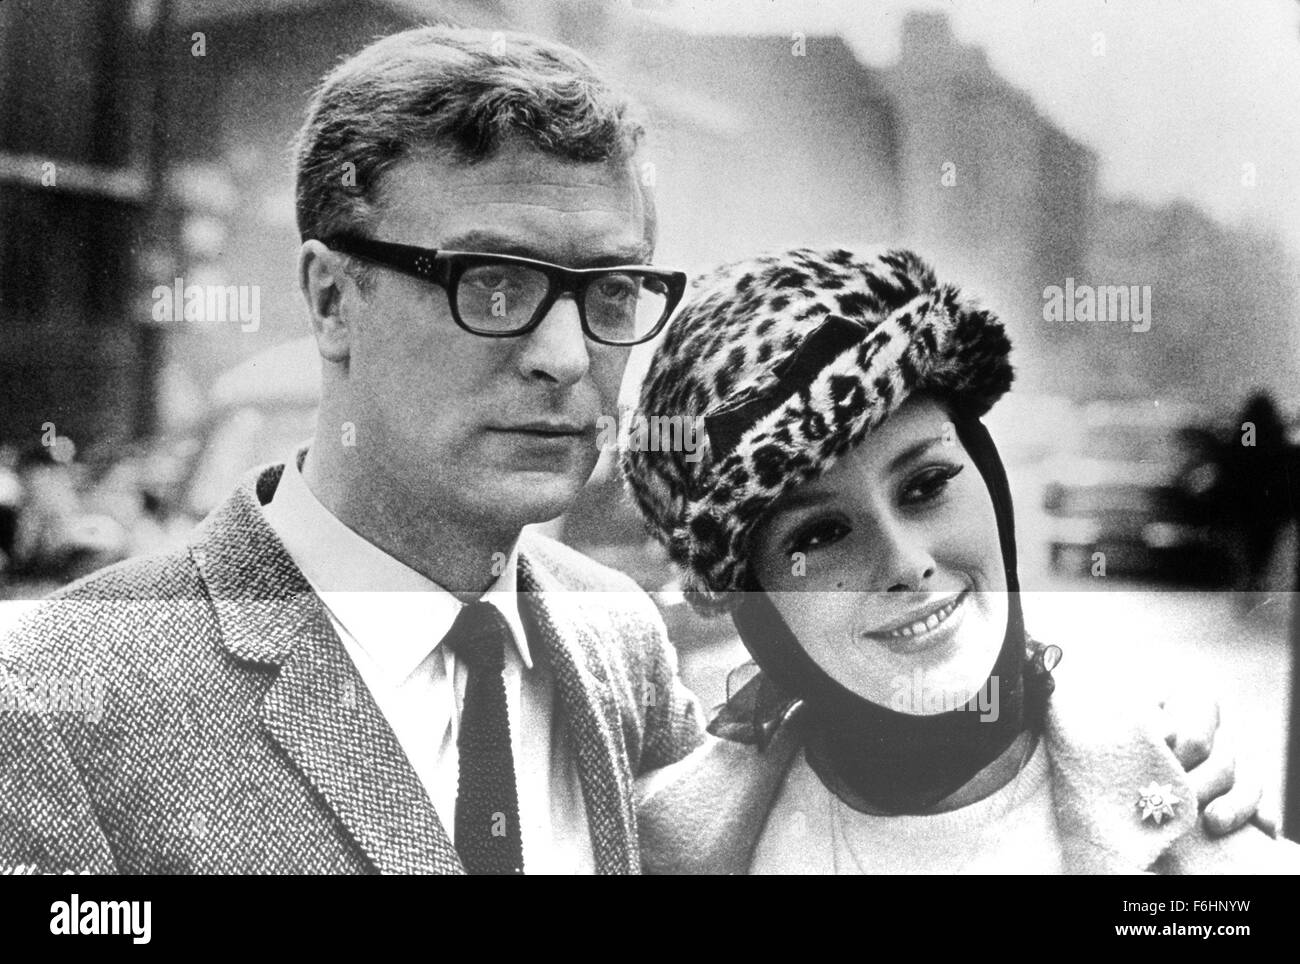 1965, Film Title: IPCRESS FILE, Director: SIDNEY J FURIE, Pictured: MICHAEL CAINE, SIDNEY J FURIE. (Credit Image: SNAP) Stock Photo